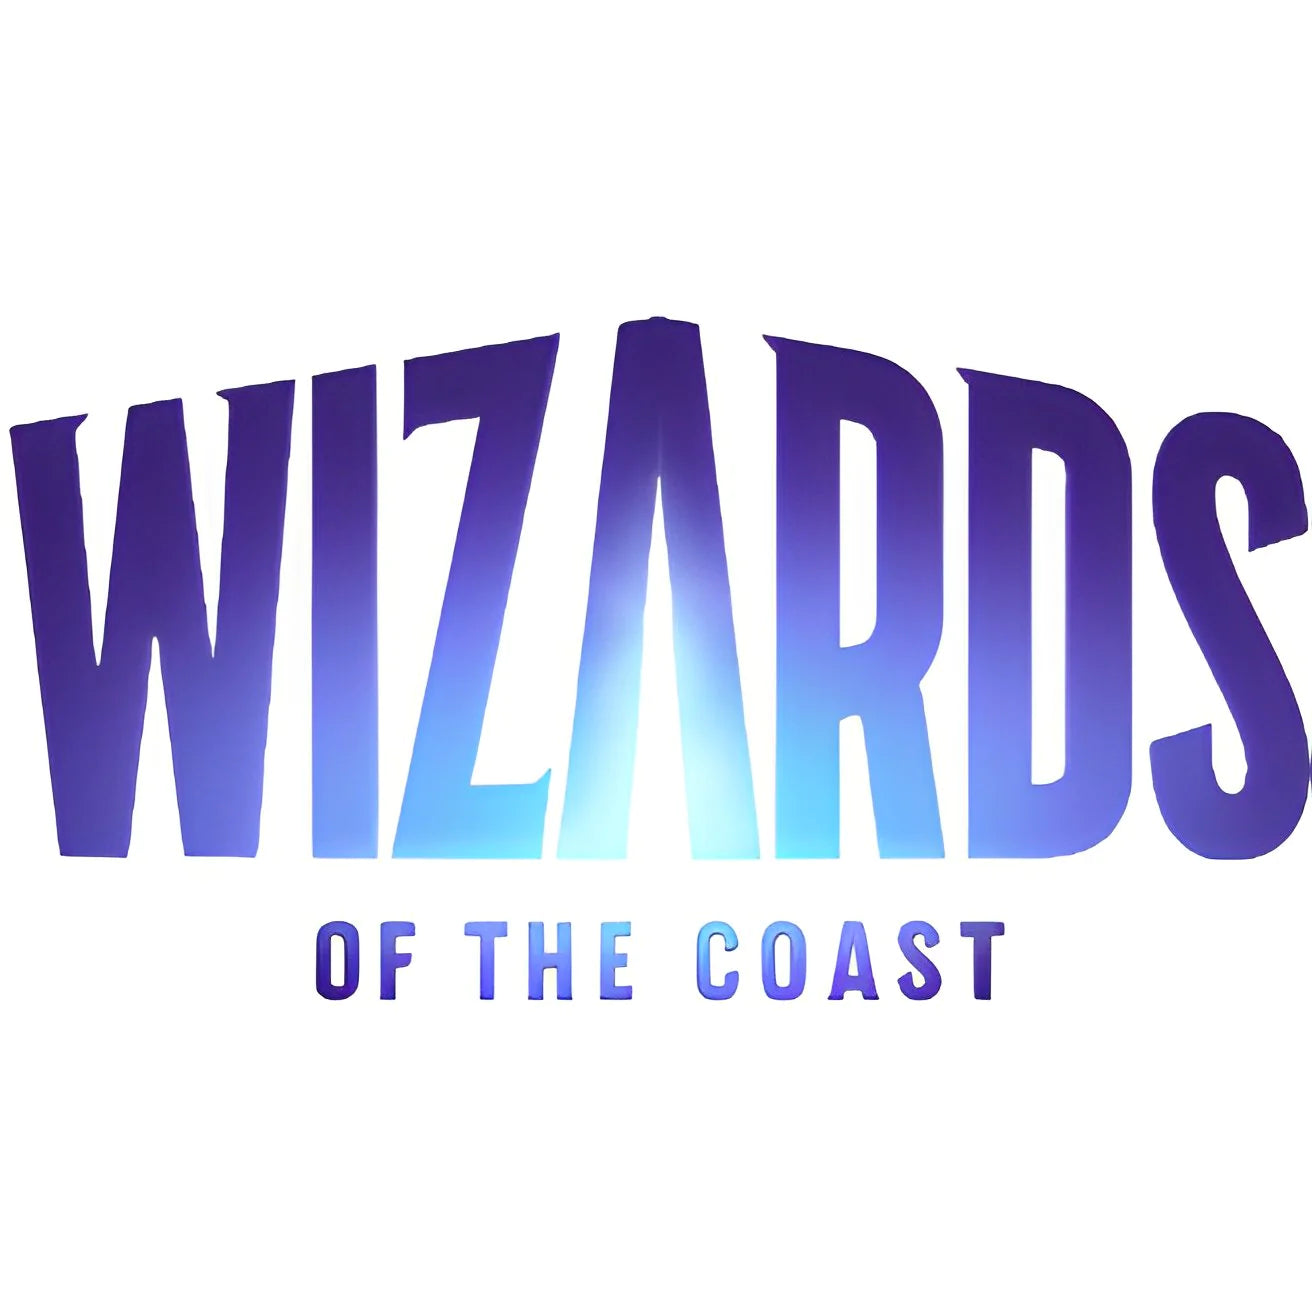 Wizards of the Coast Collection